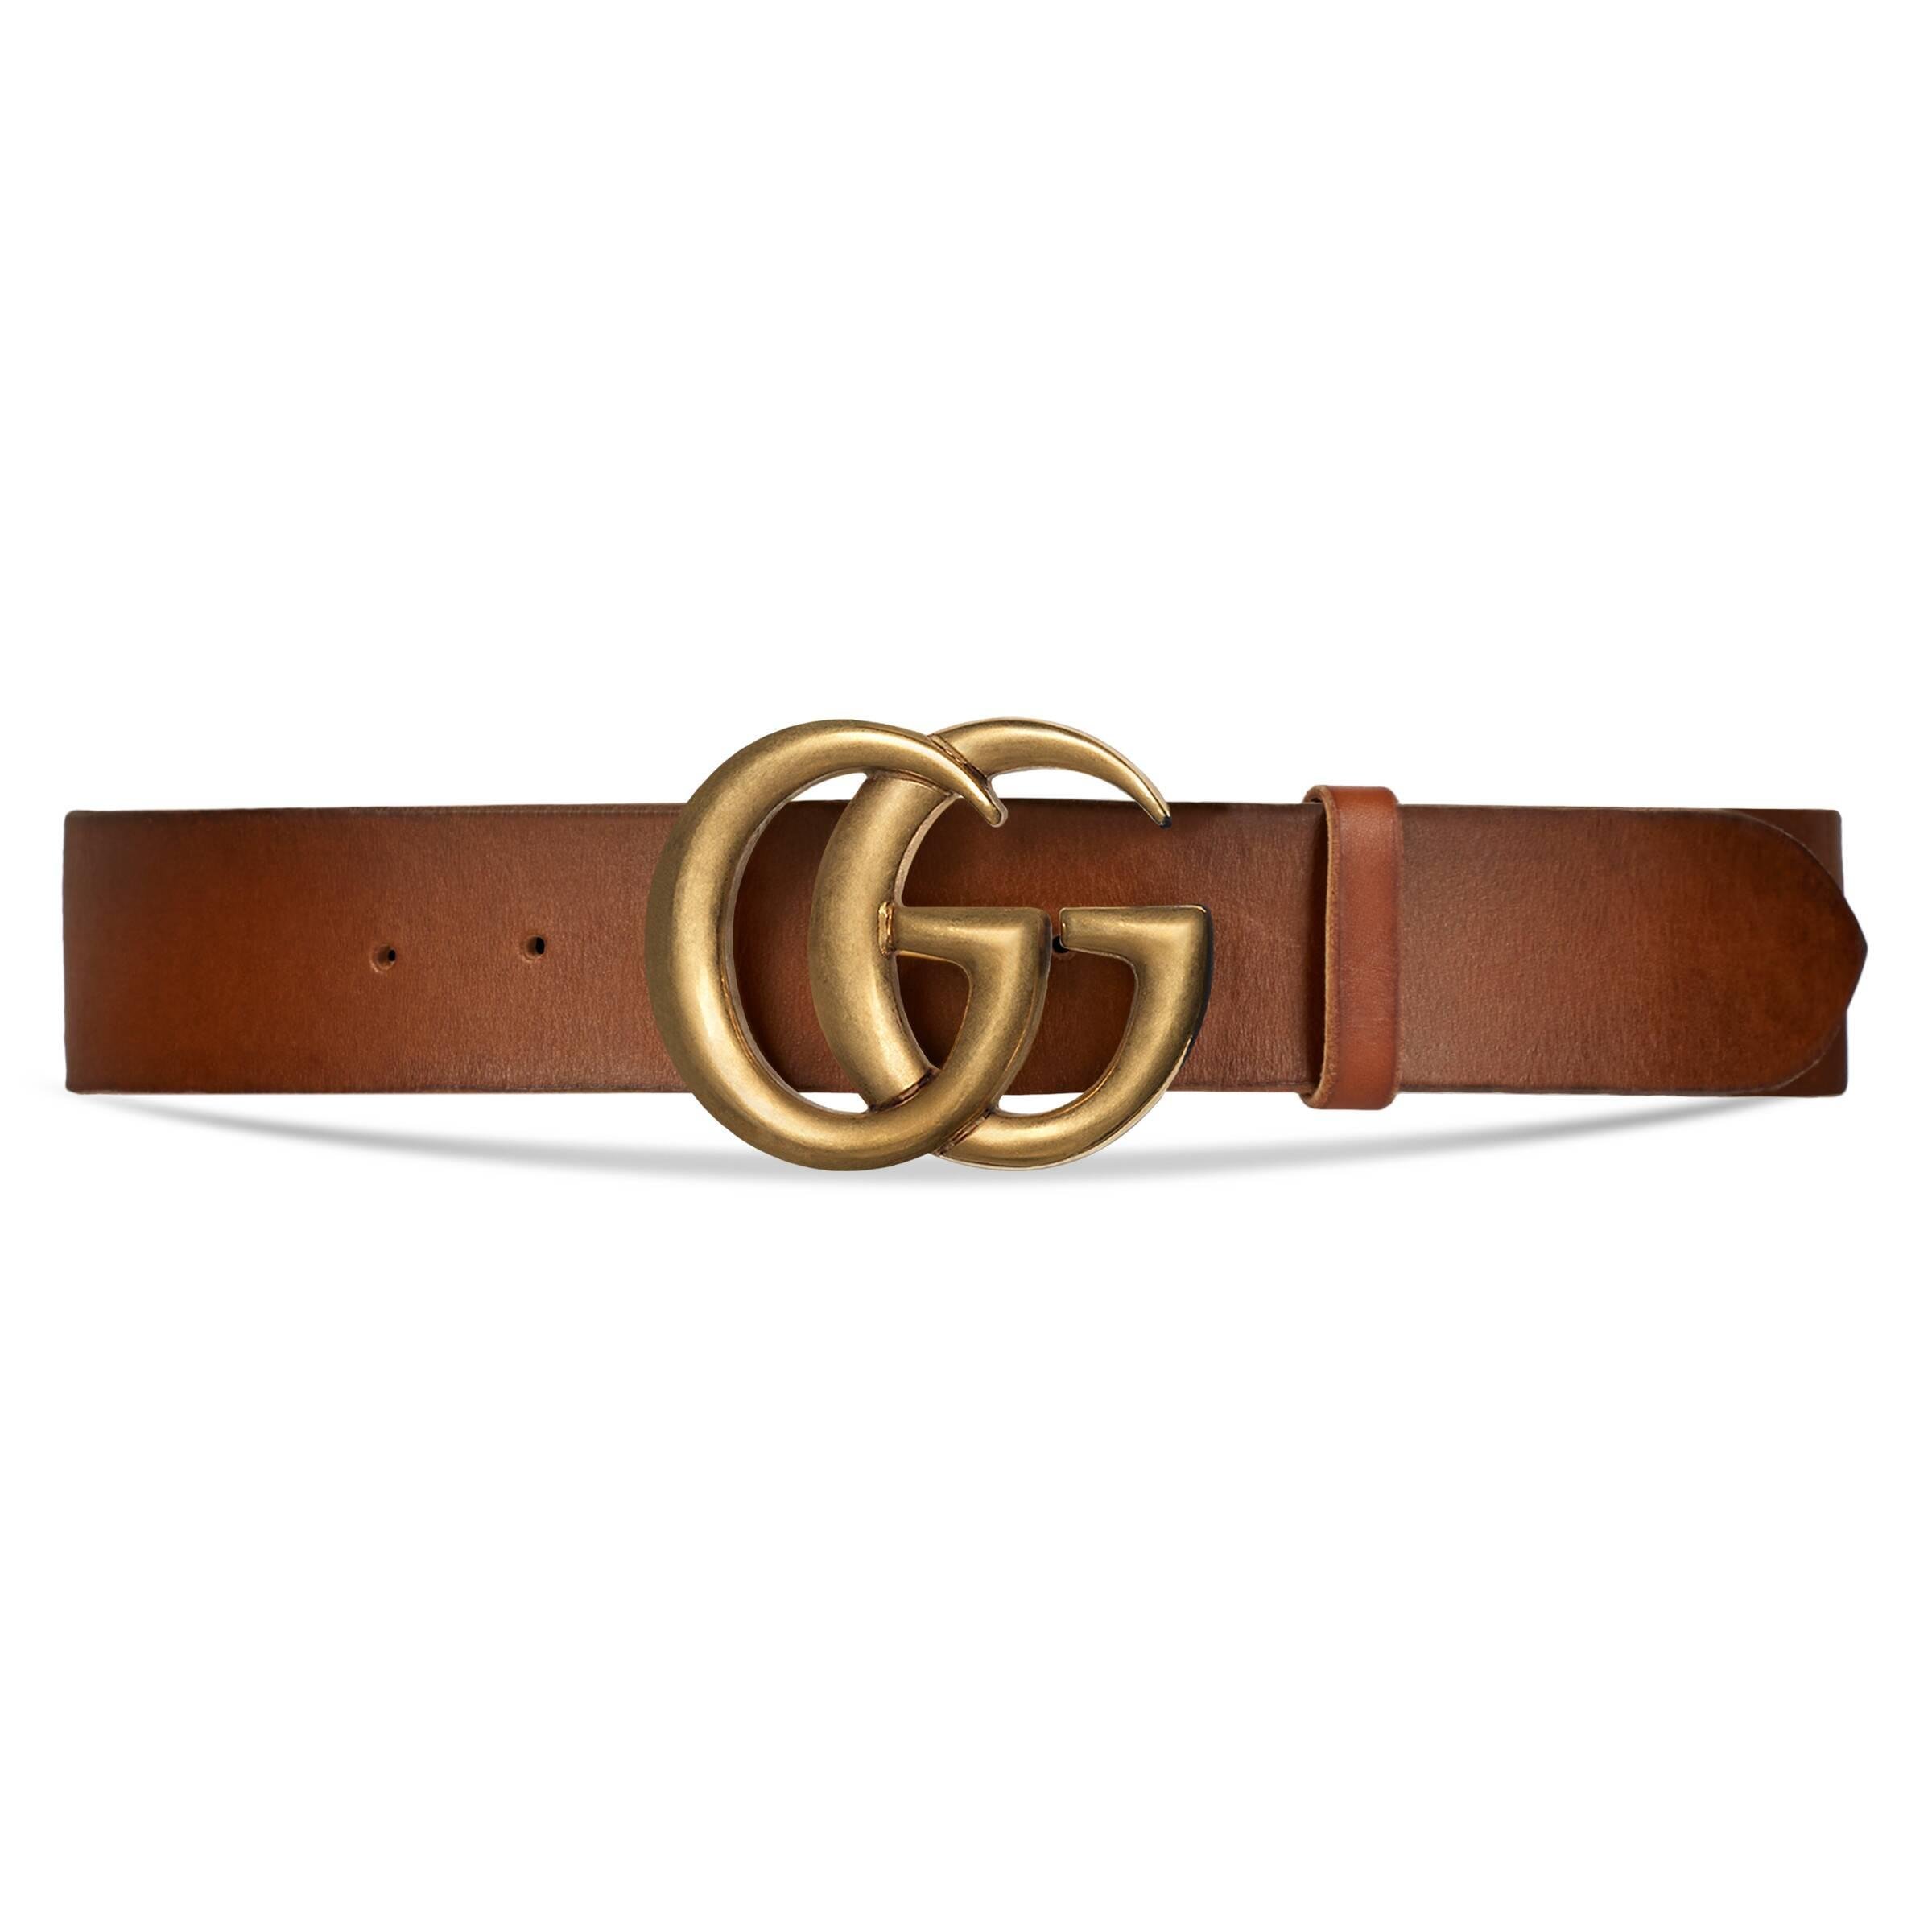 Gucci Leather Belt With Double G Buckle in Brown for Men - Lyst